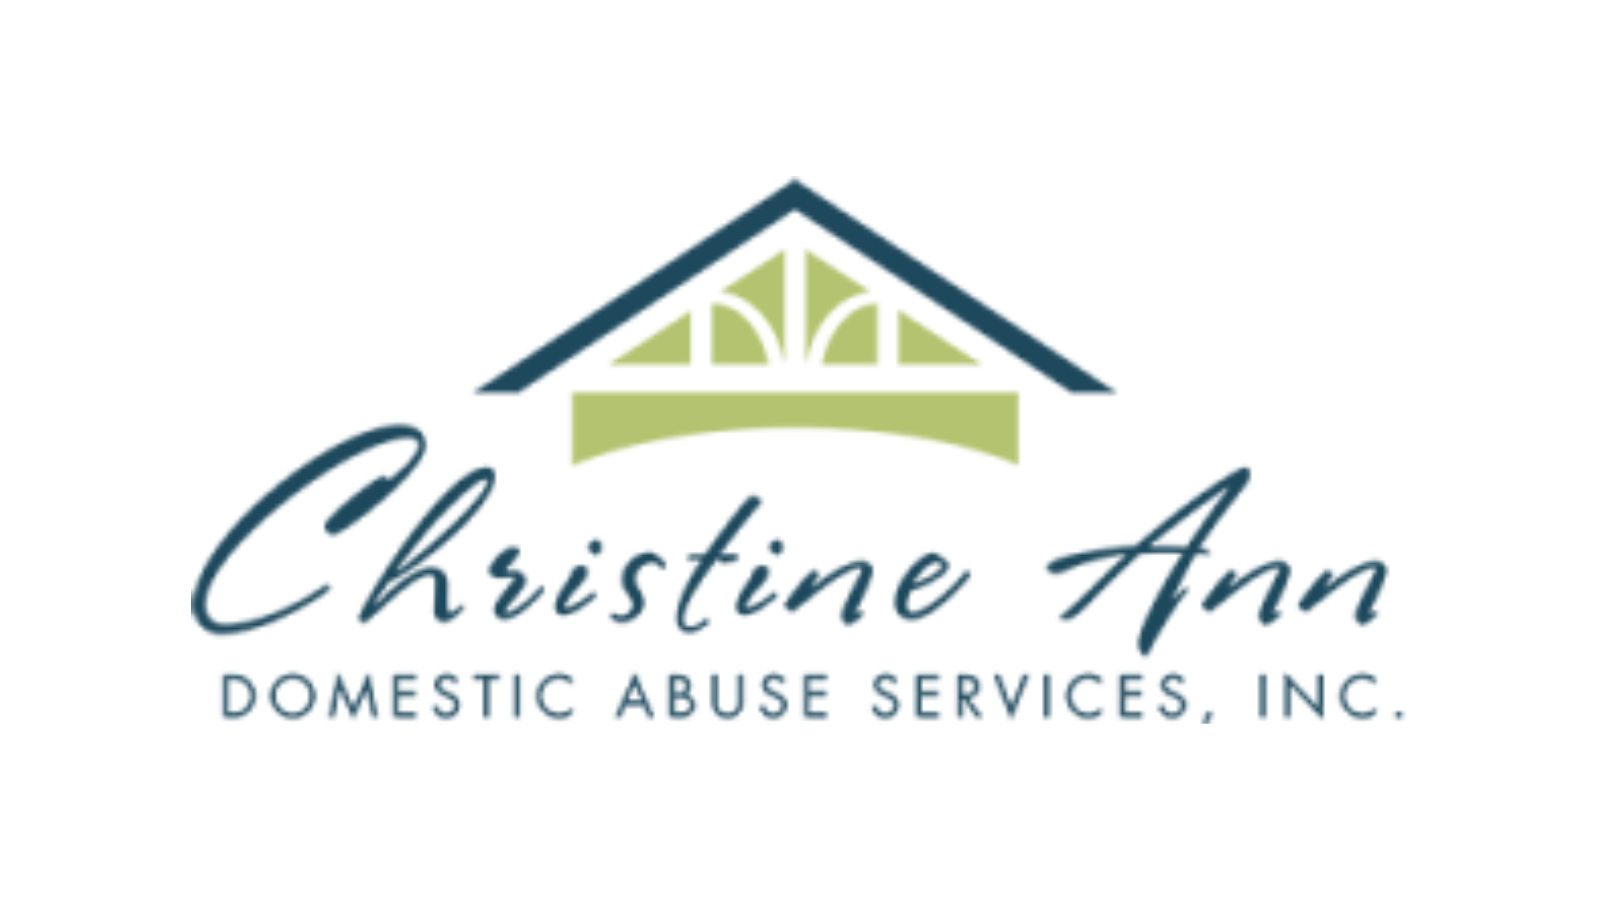 Christine Ann to expand services for domestic violence survivors